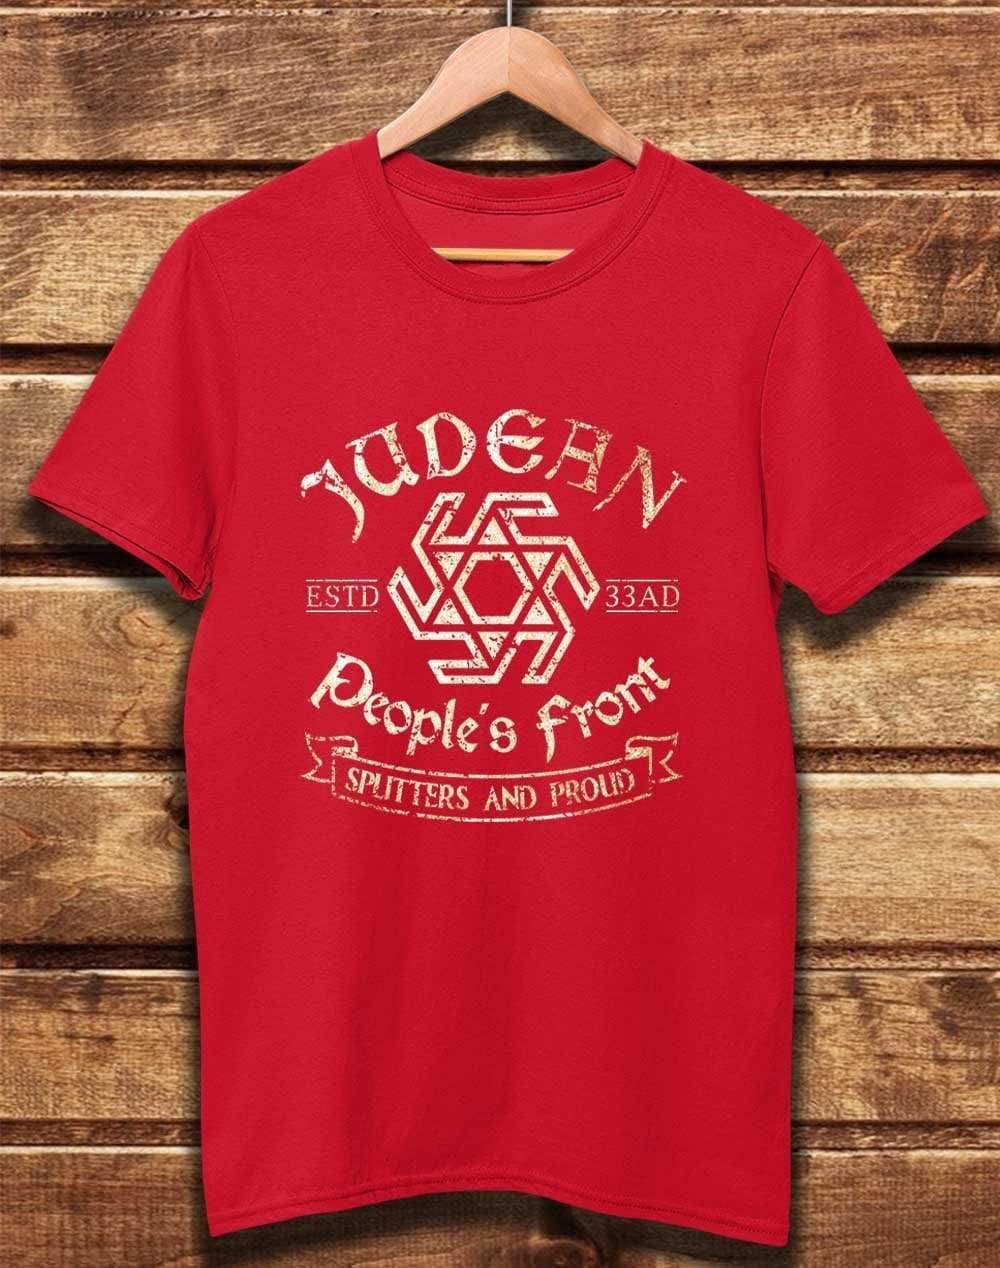 DELUXE Judean People's Front Organic Cotton T-Shirt XS / Red  - Off World Tees